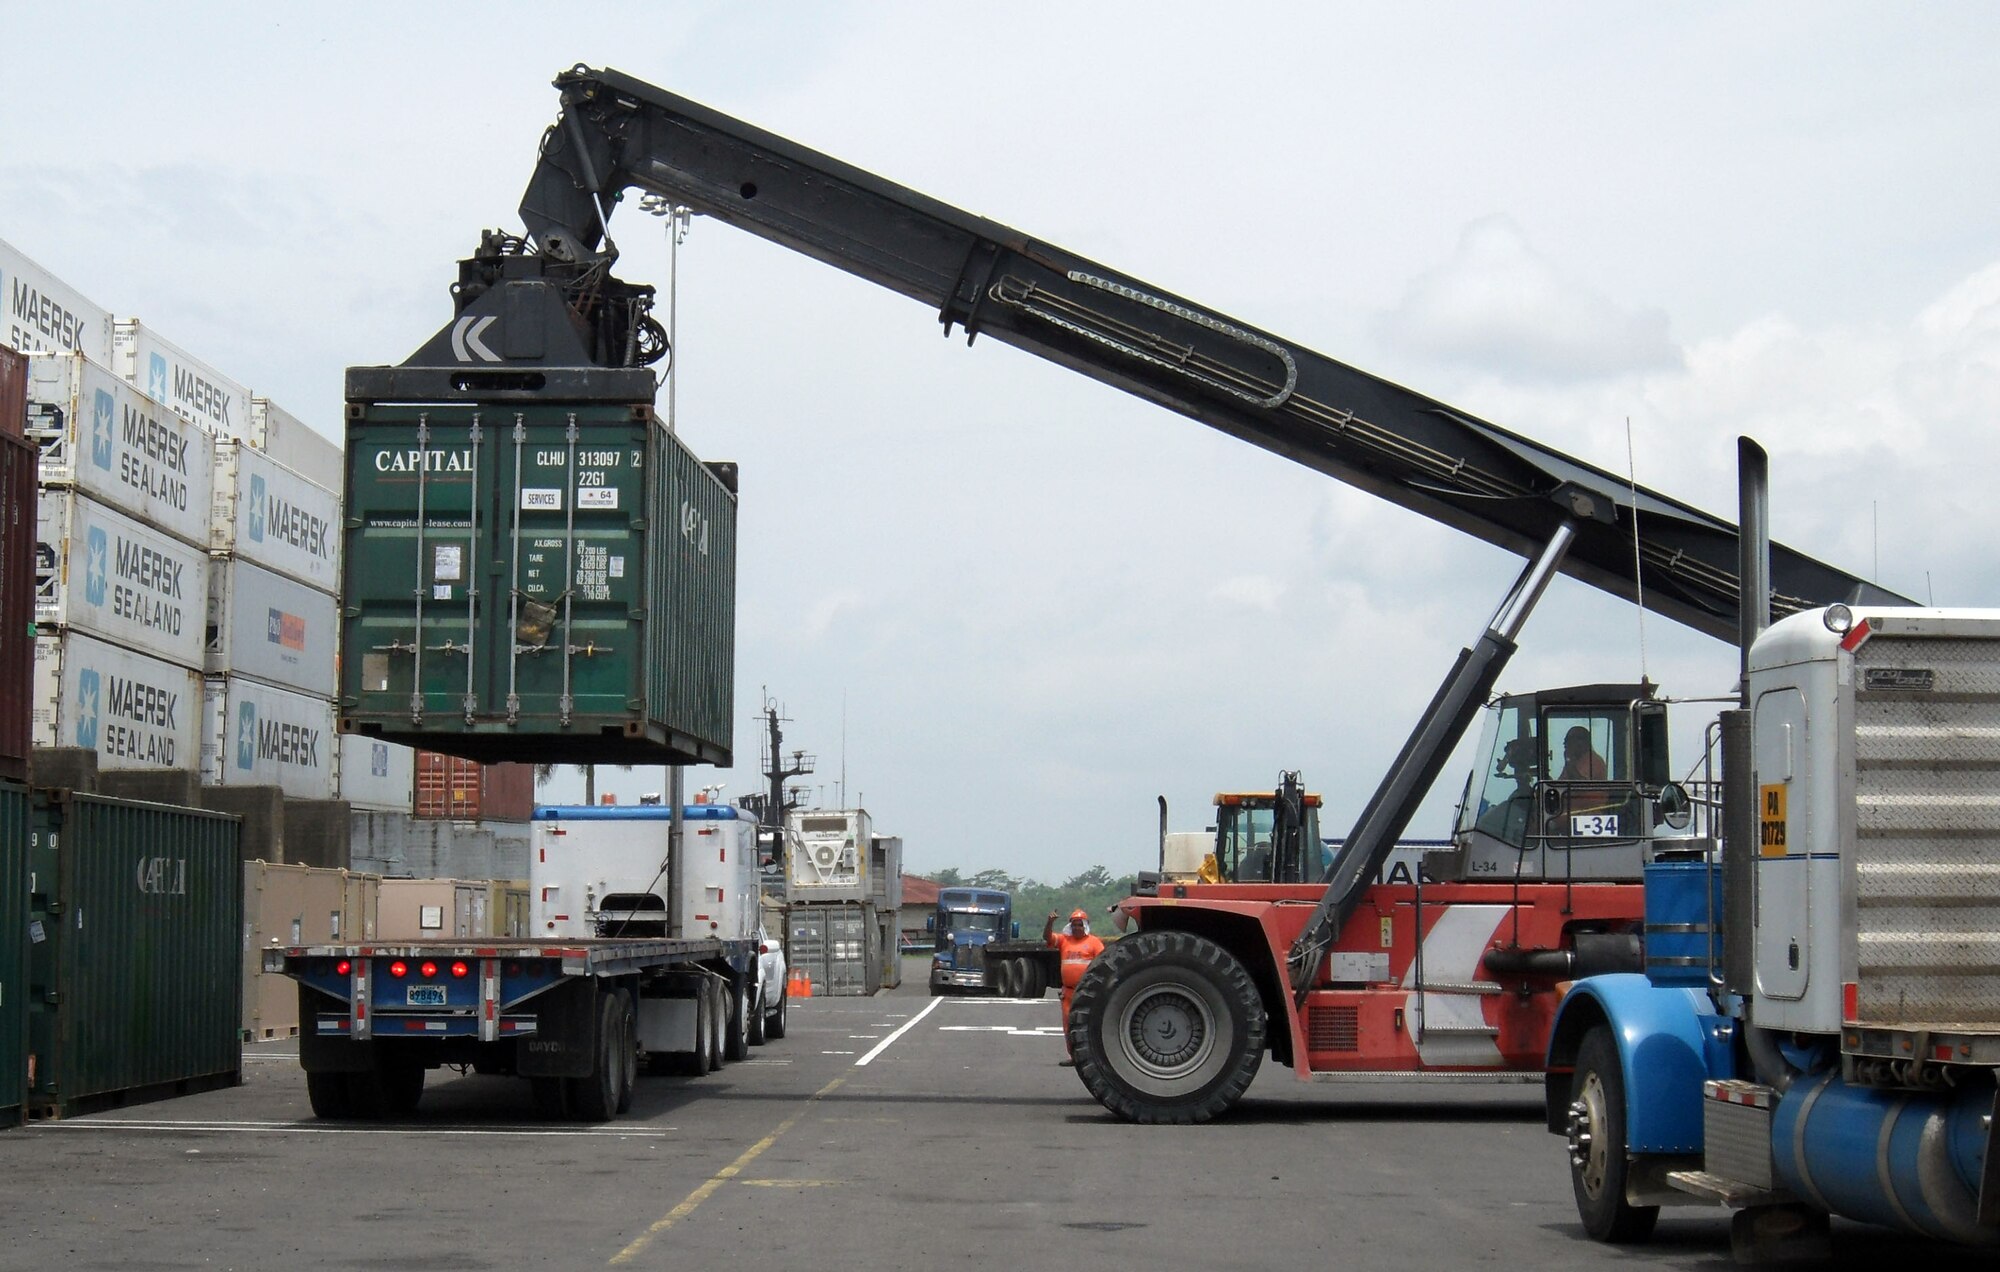 Airmen load cargo containers onto a flatbed truck at the the Panama City port in support of New Horizons Panama 2010, a 12-week humanitarian assistance mission. More than 250 Airmen, Soldiers and Marines will deploy to six constructions sites and five mecical missions in Panama. (U.S. Air Force photo/Staff Sgt. Teresa Burger)